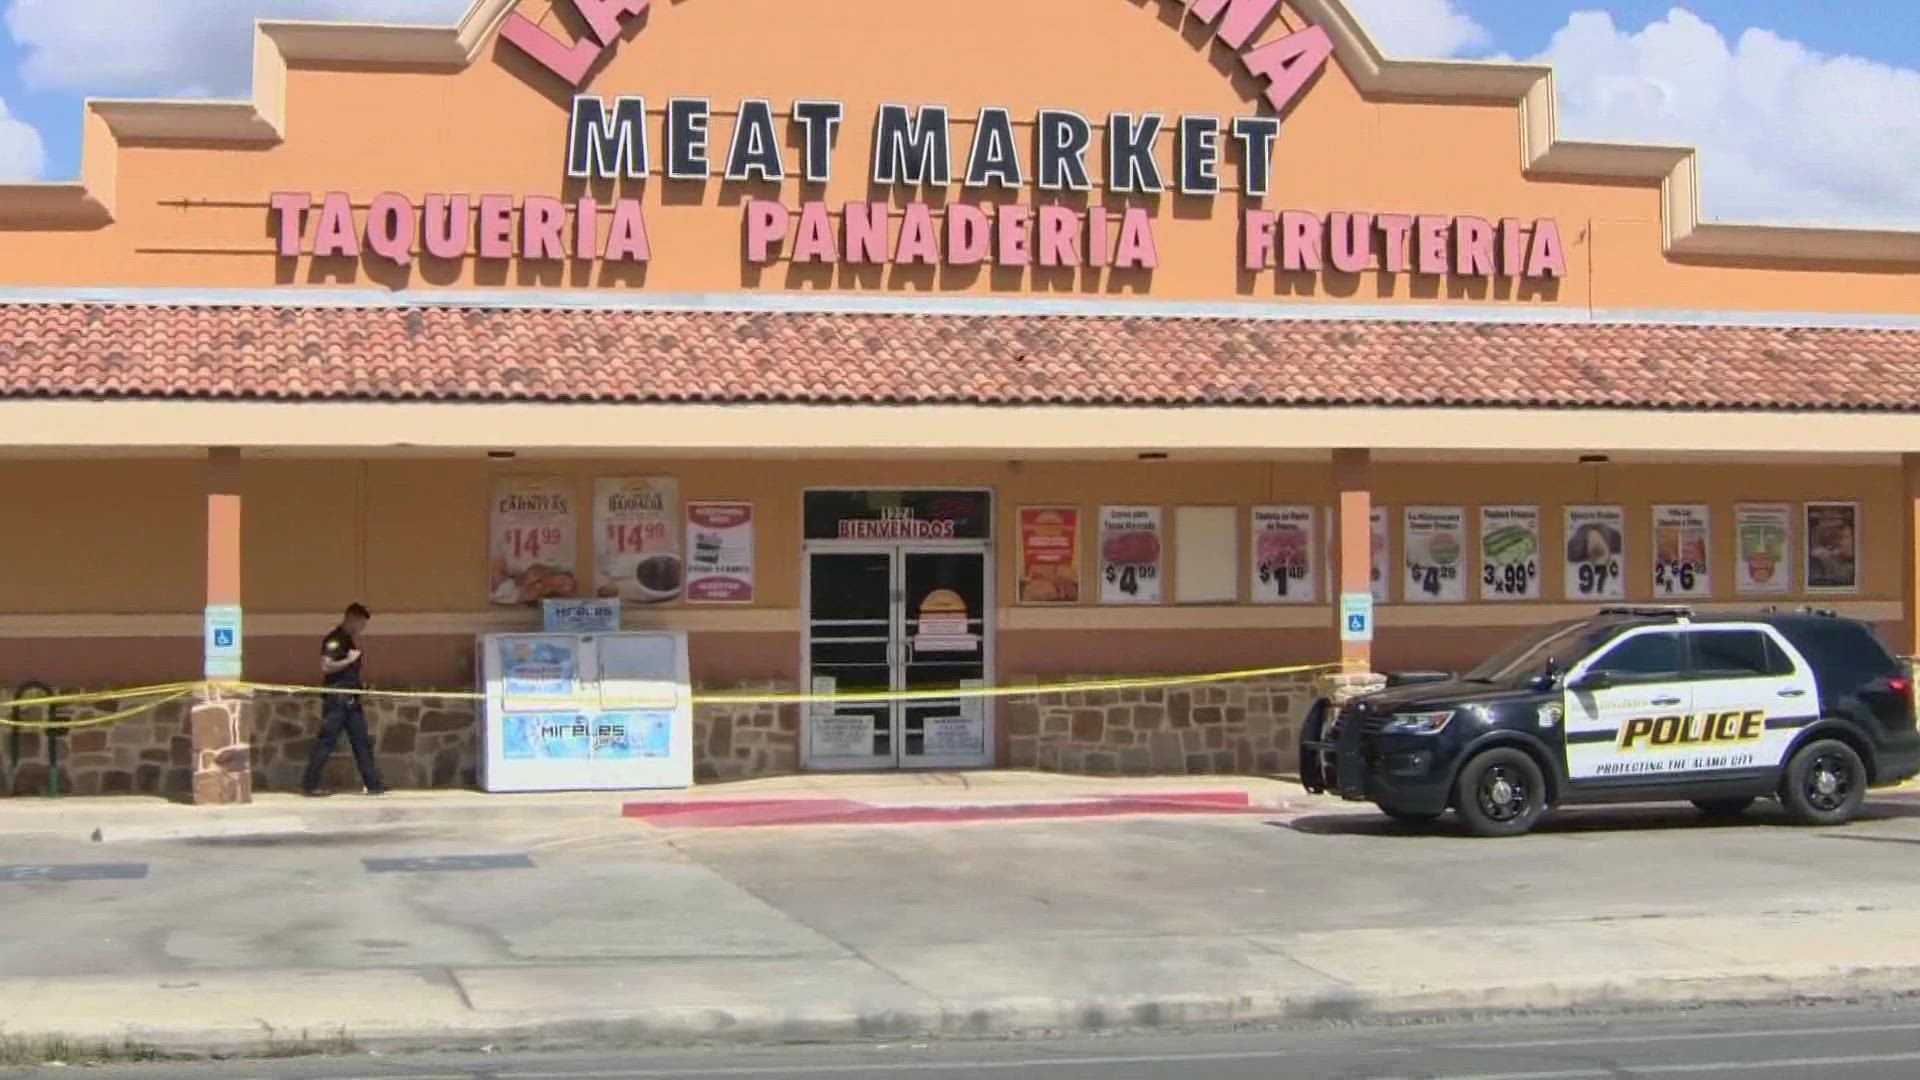 The shooting happened at a house behind a meat market.